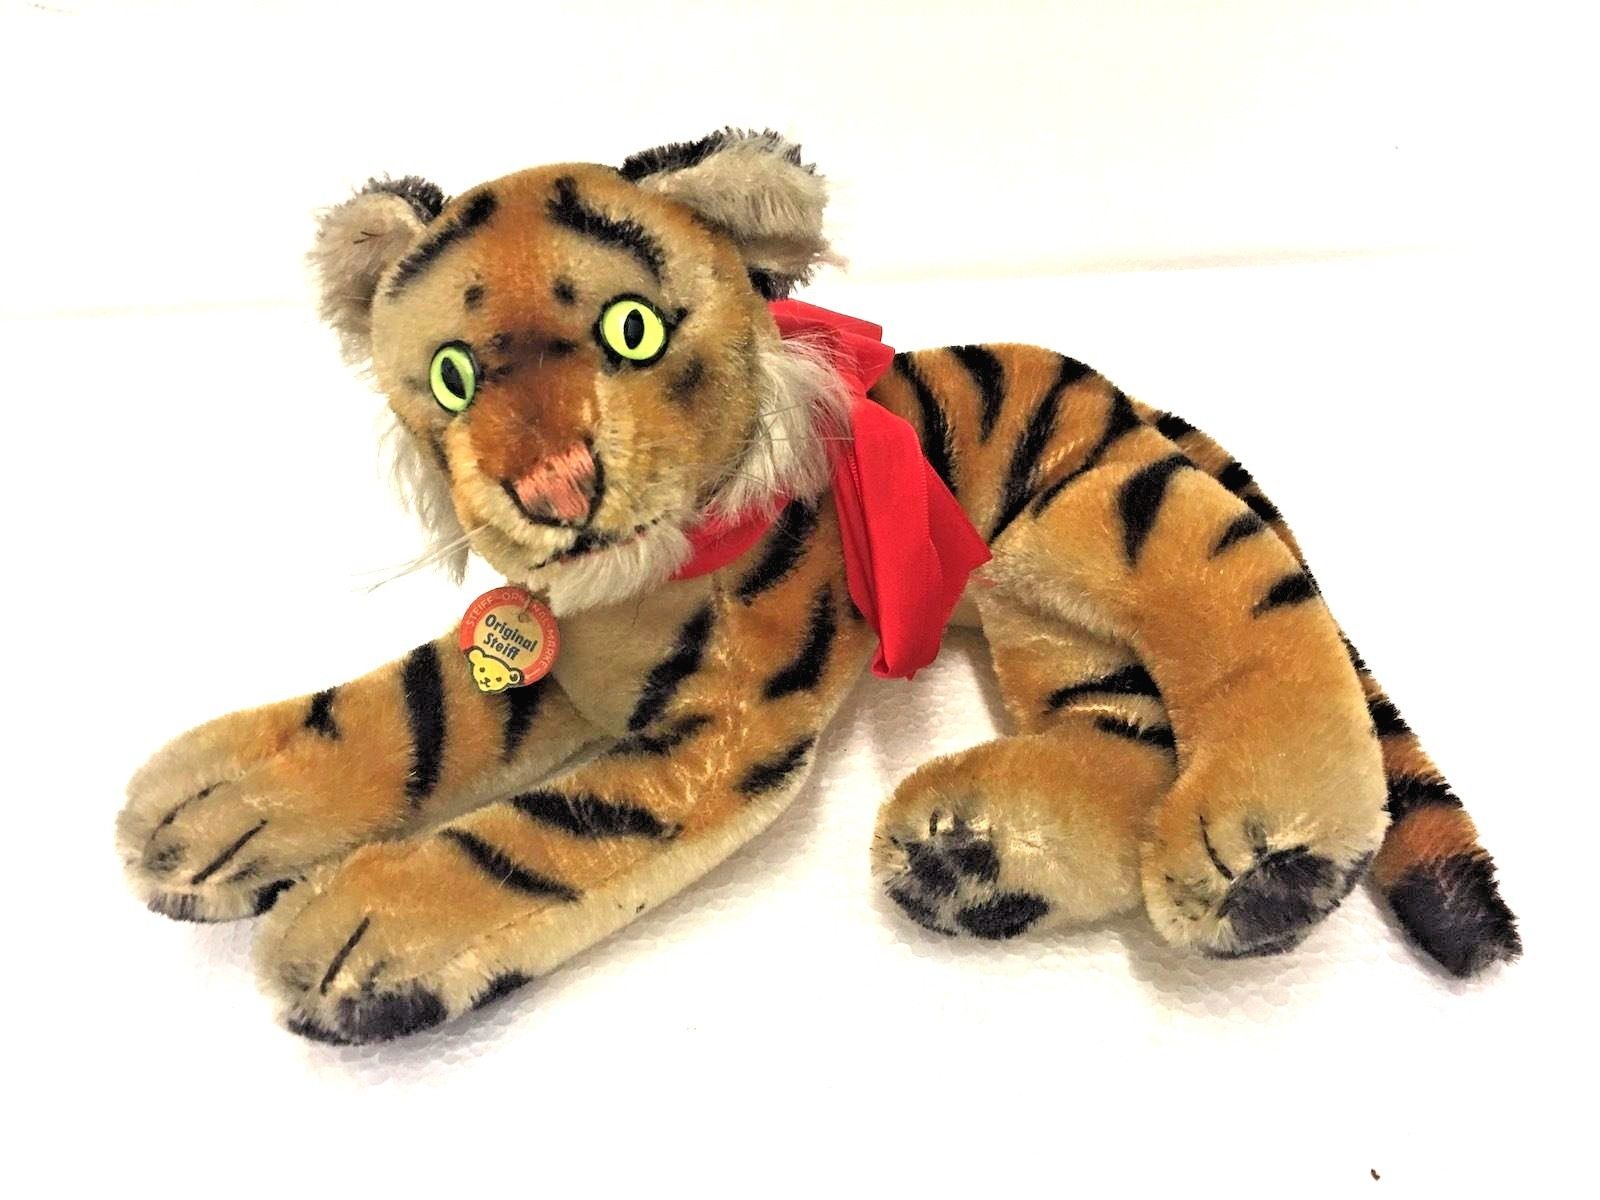 W7 * Vintage Steiff stuffed Mohair Tiger Animal Toy Germany 1960's